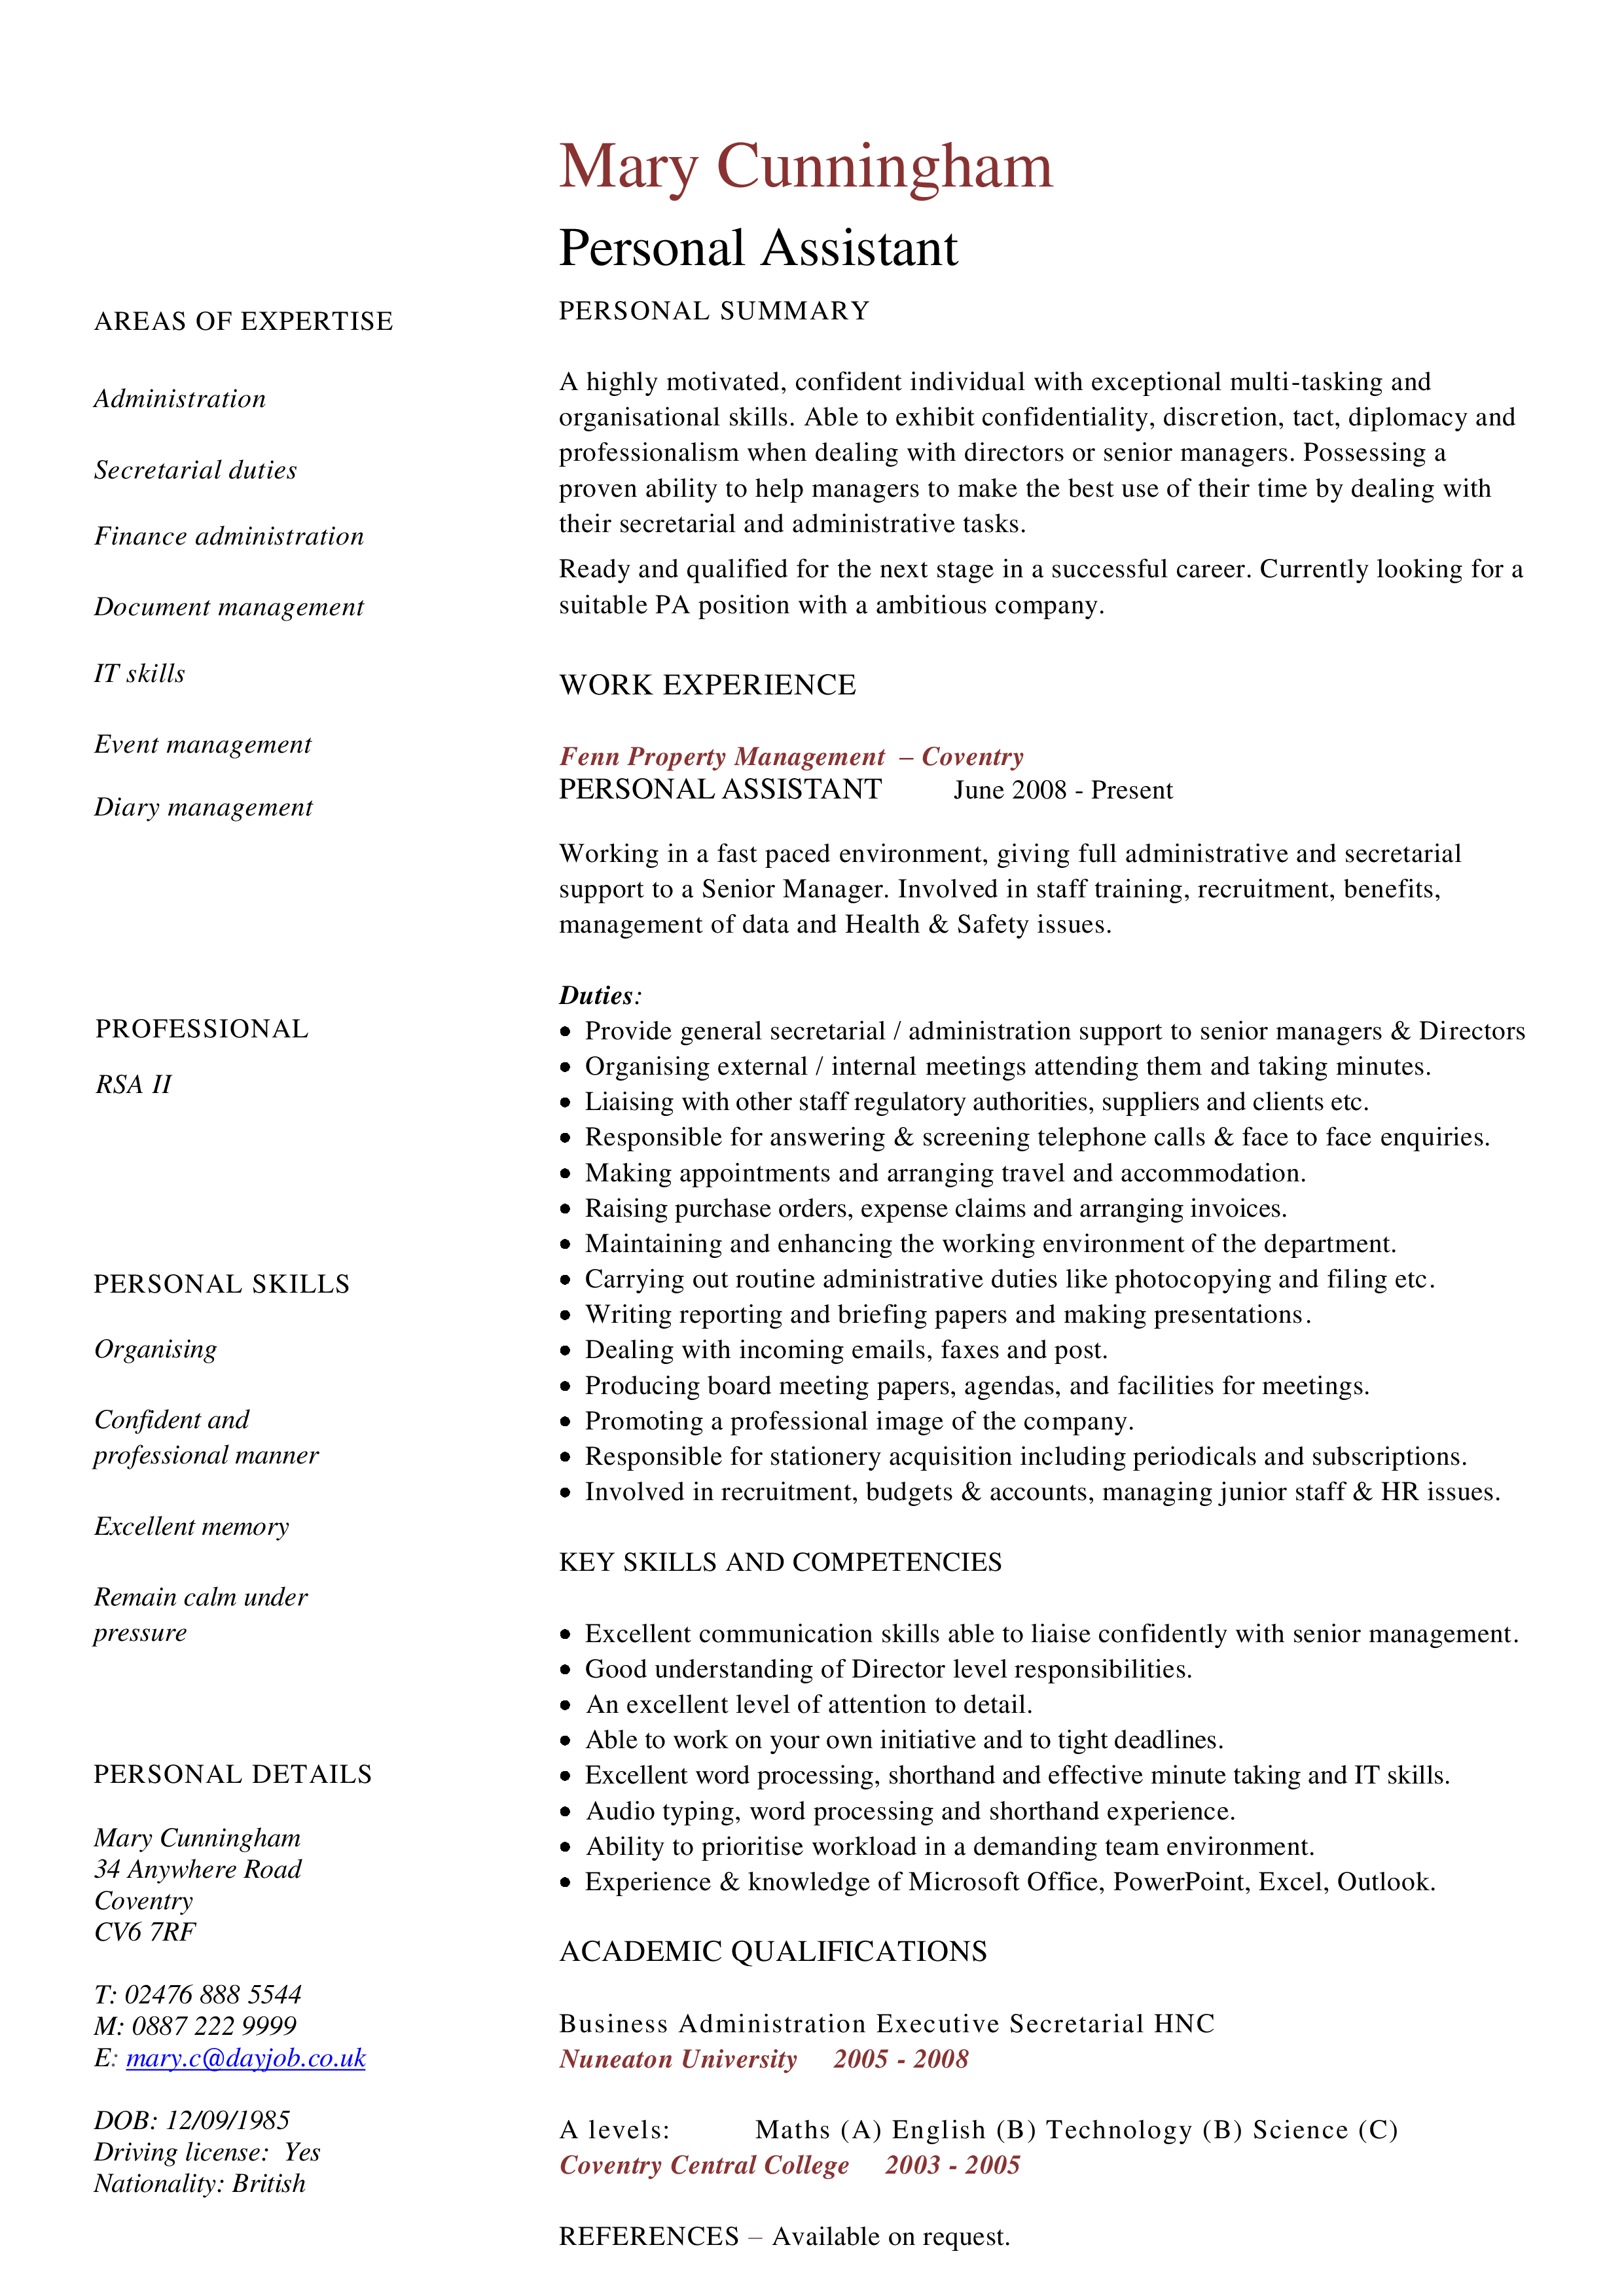 Personal Assistant Resume 模板